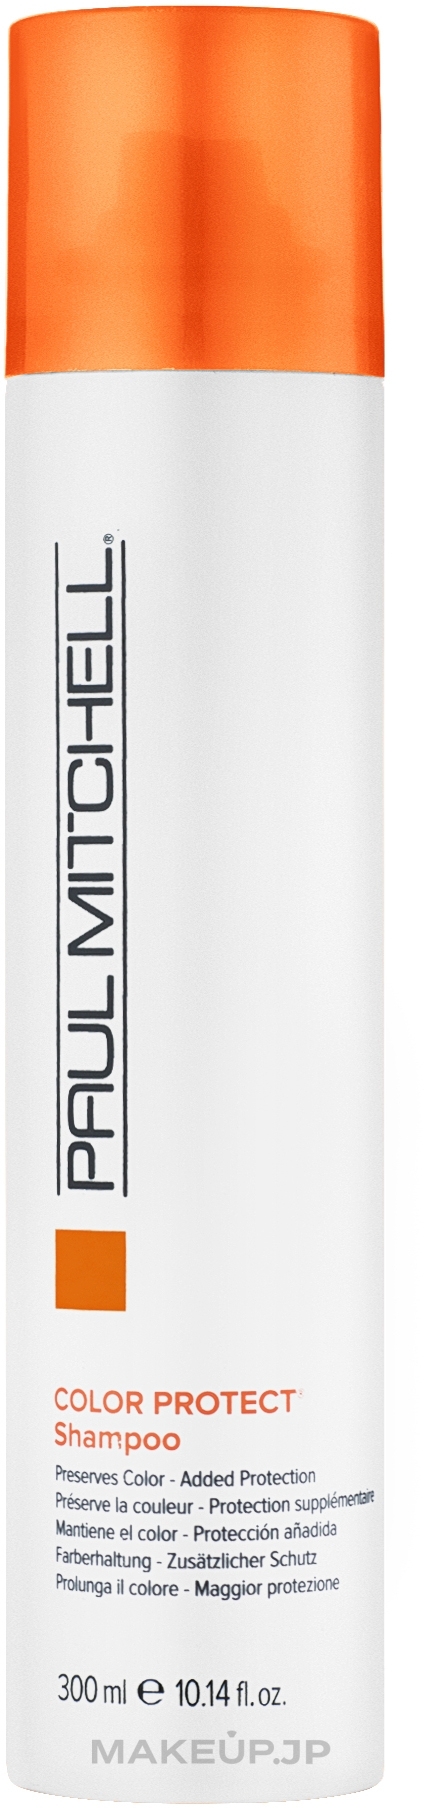 Colored Hair Shampoo - Paul Mitchell ColorCare Color Protect Daily Shampoo — photo 300 ml